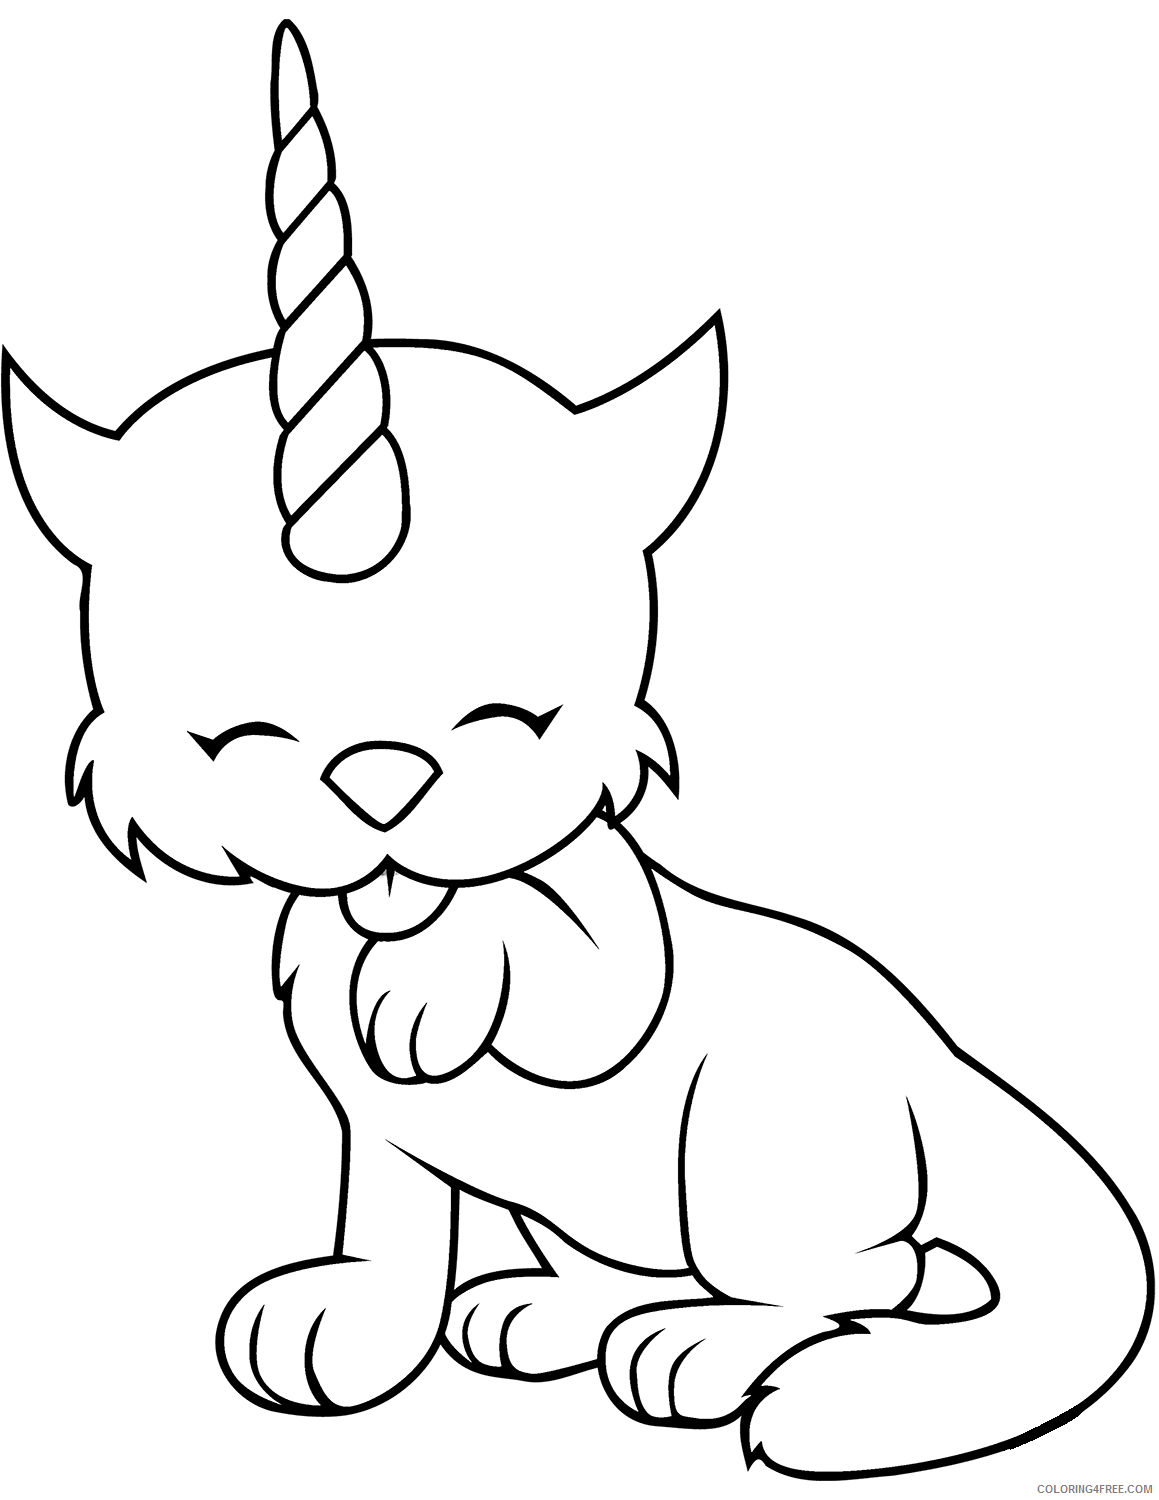 Cat Coloring Pages Animal Printable Sheets caticorn 2021 0812 Coloring4free